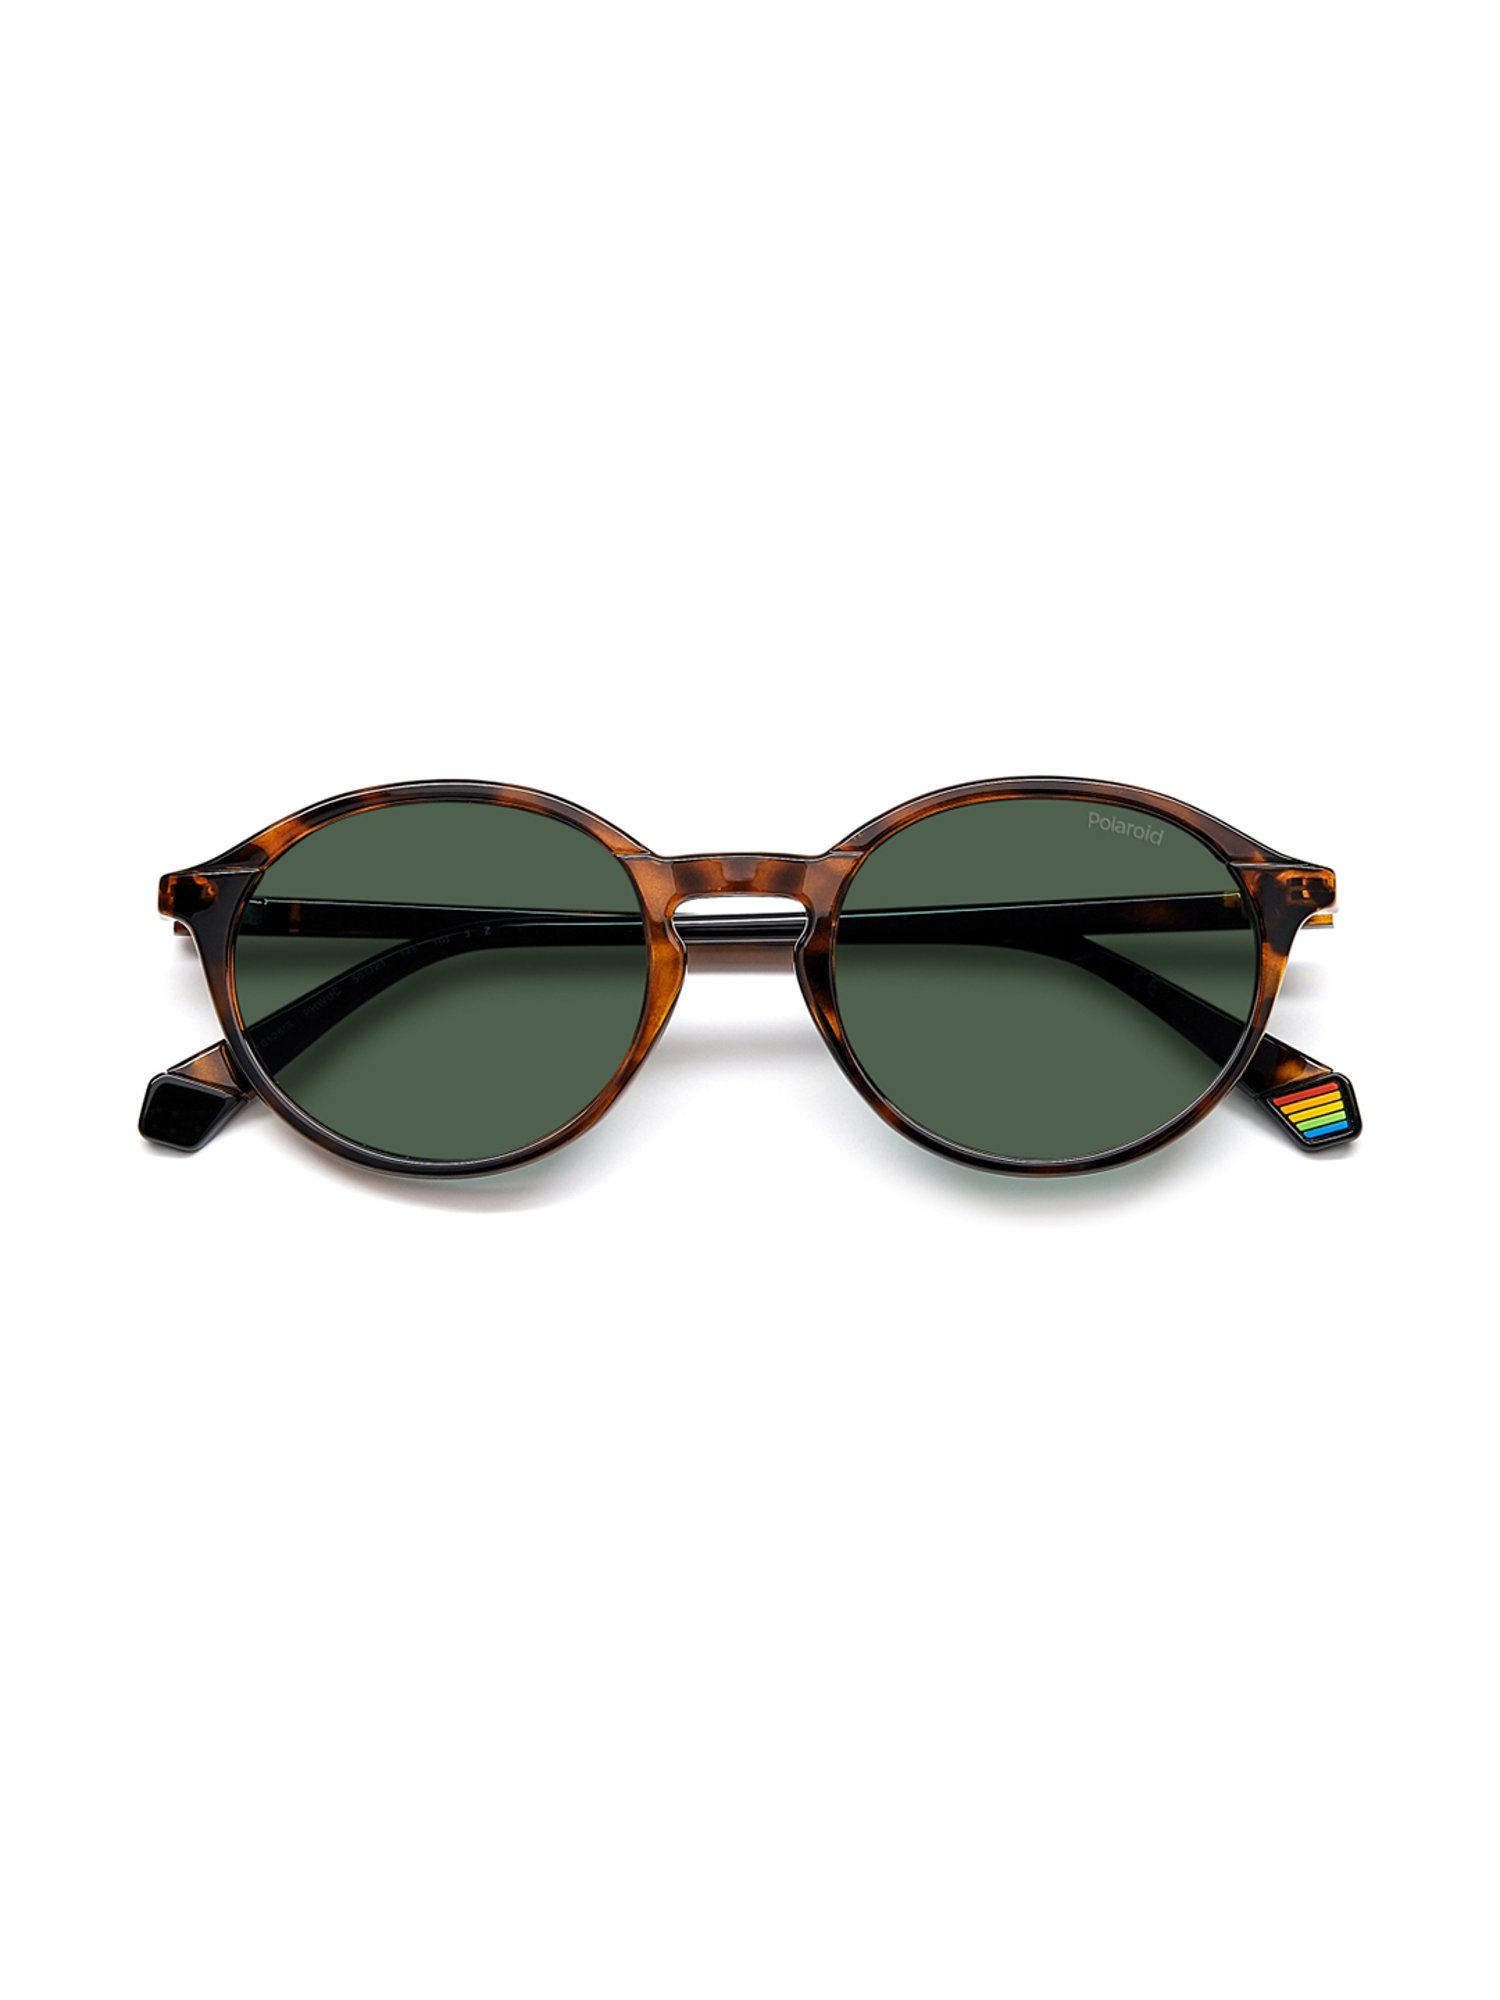 Round sunglasses - green frames with green lenses